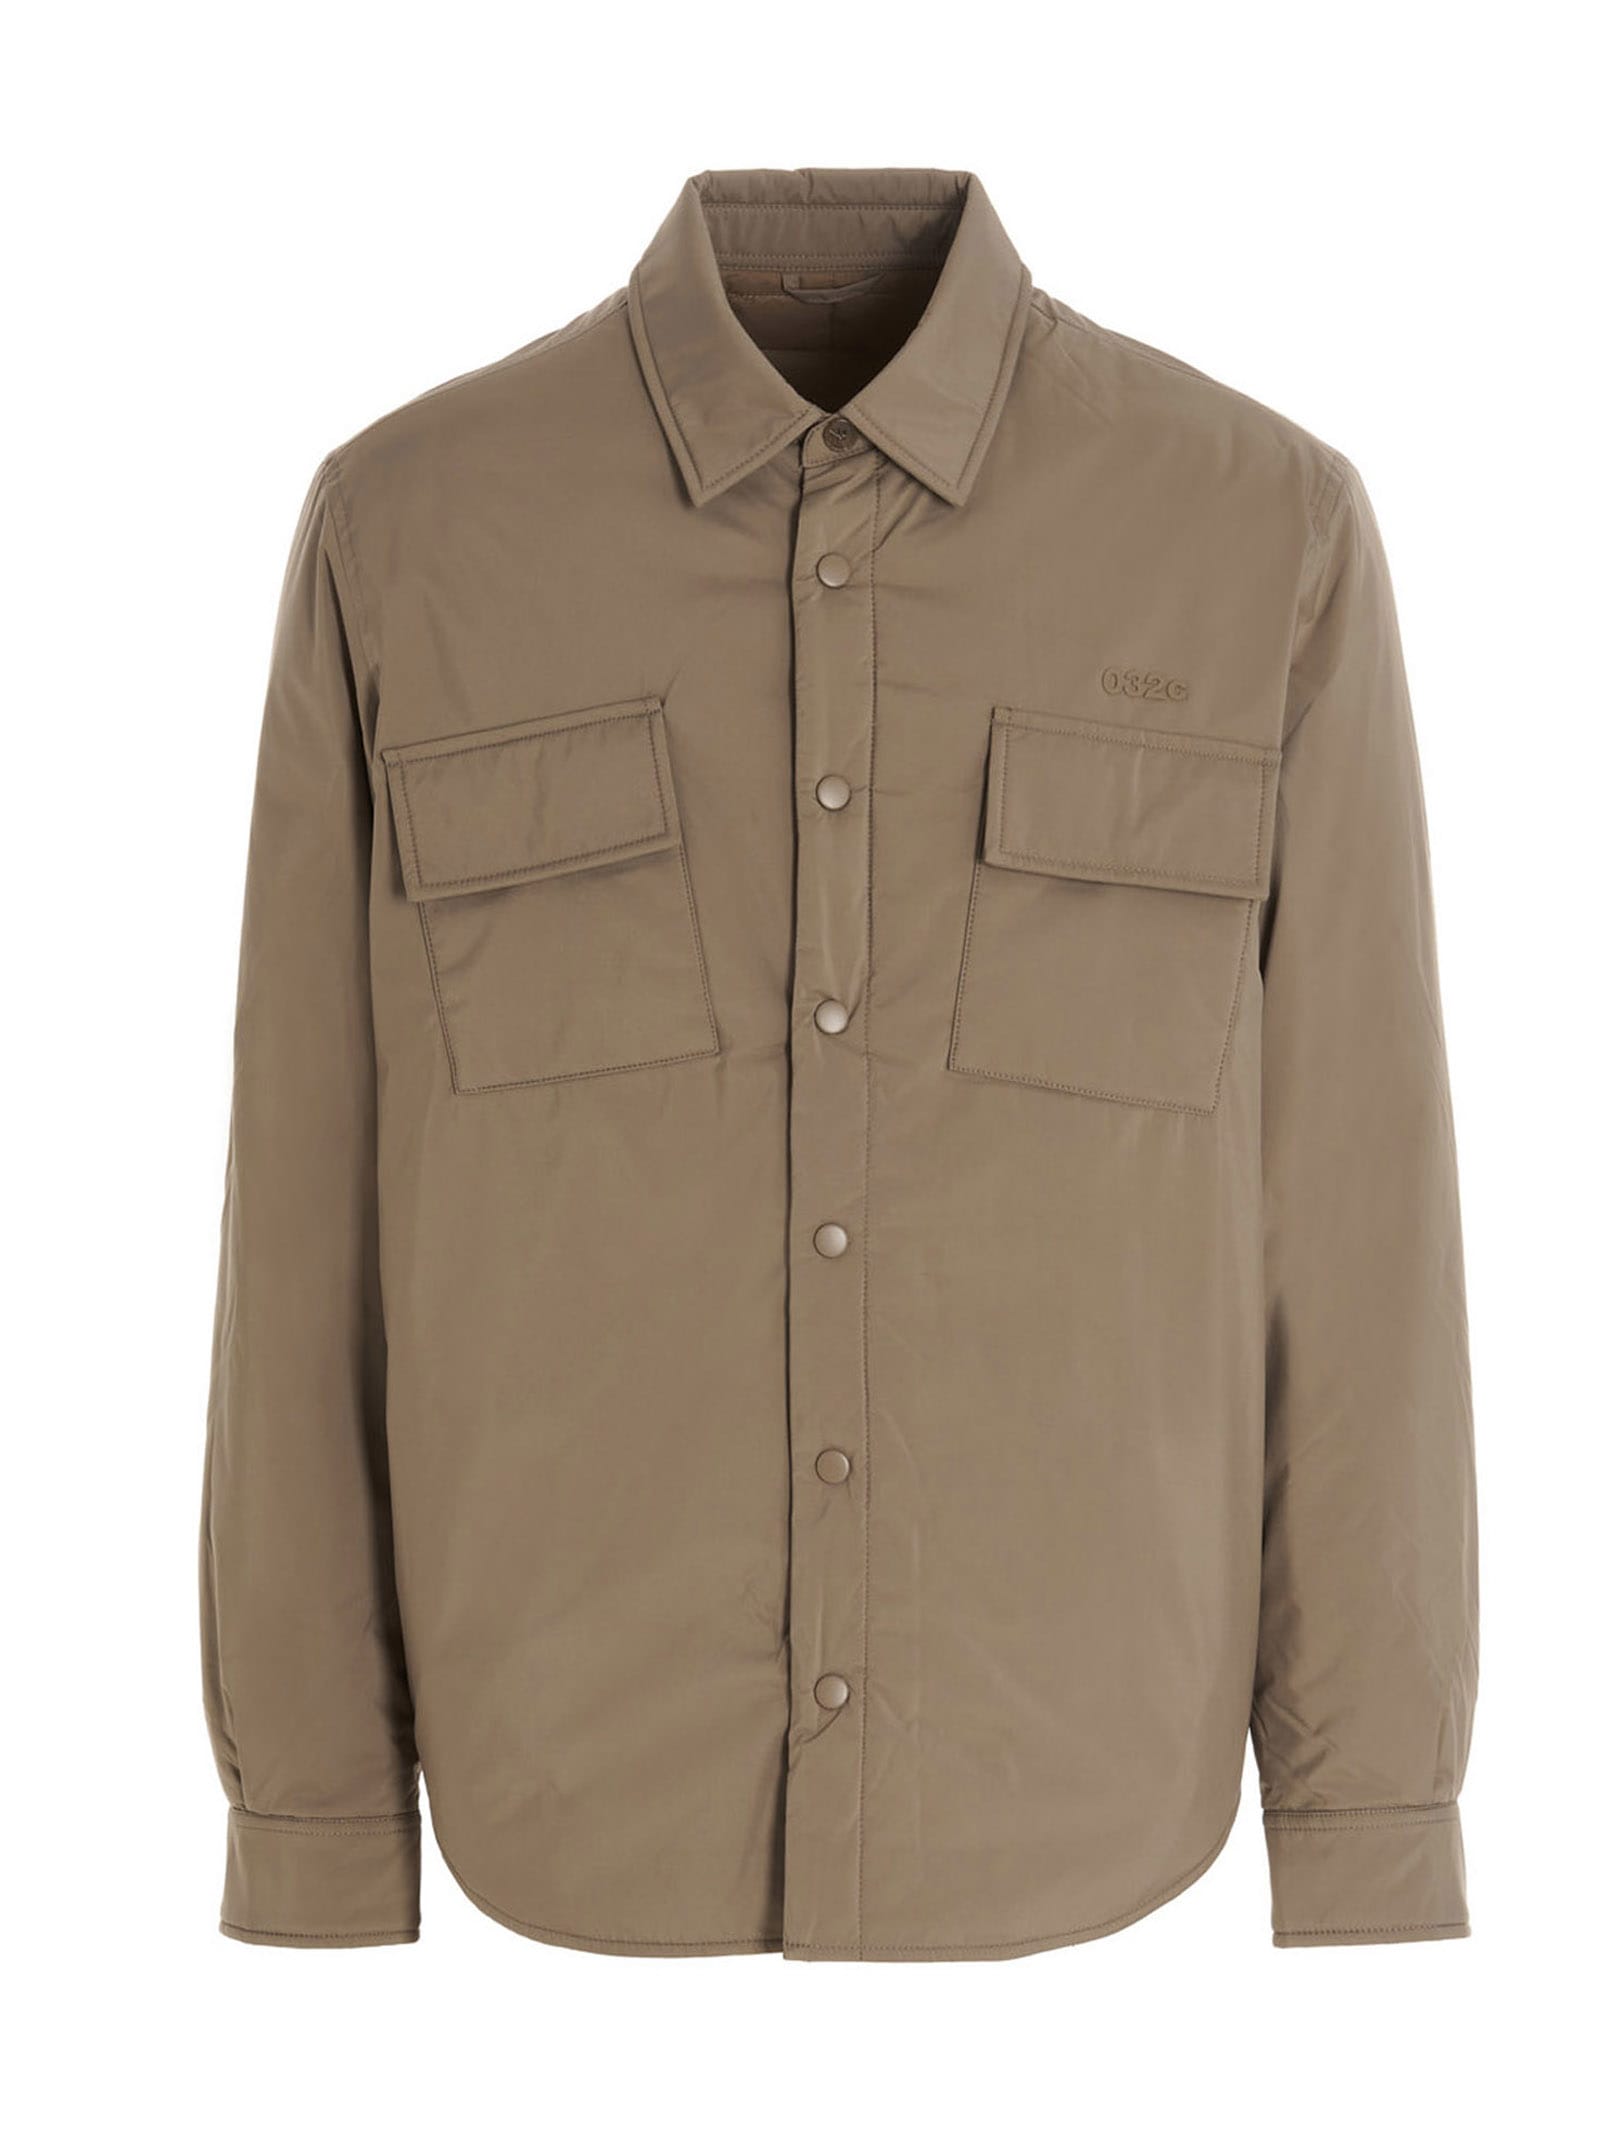 032c padded Button Up Overshirt